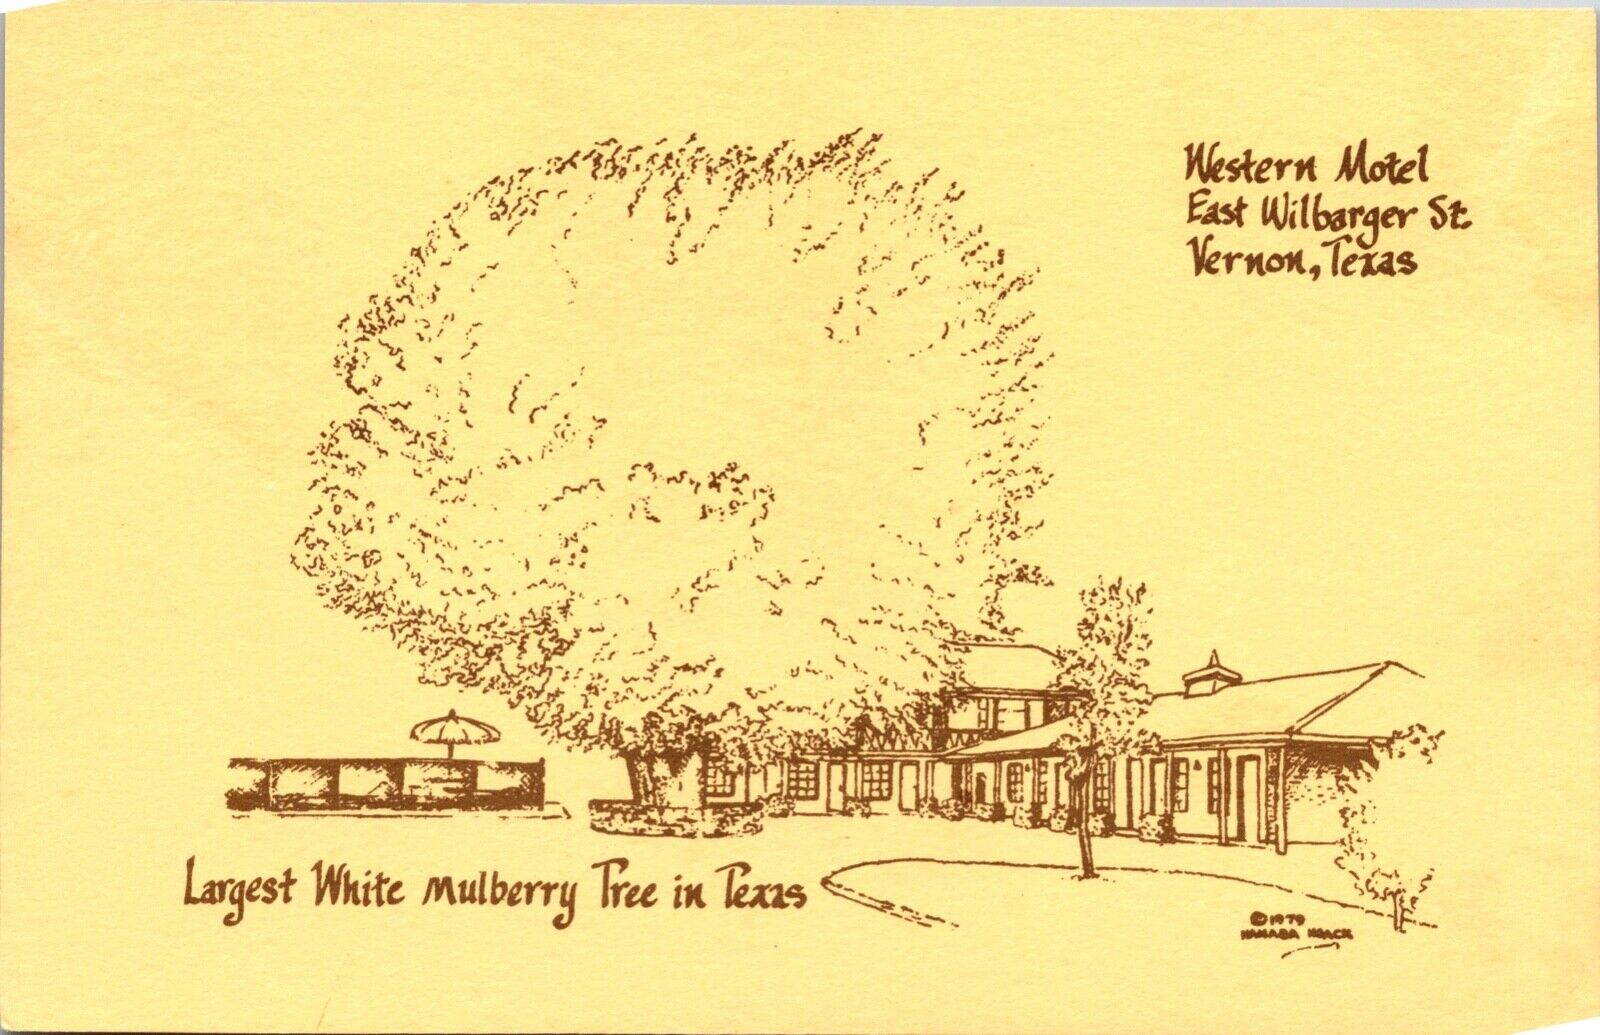 Vernon Texas Western Motel Largest White Mulberry Tree Unusual Color Postcard 6H